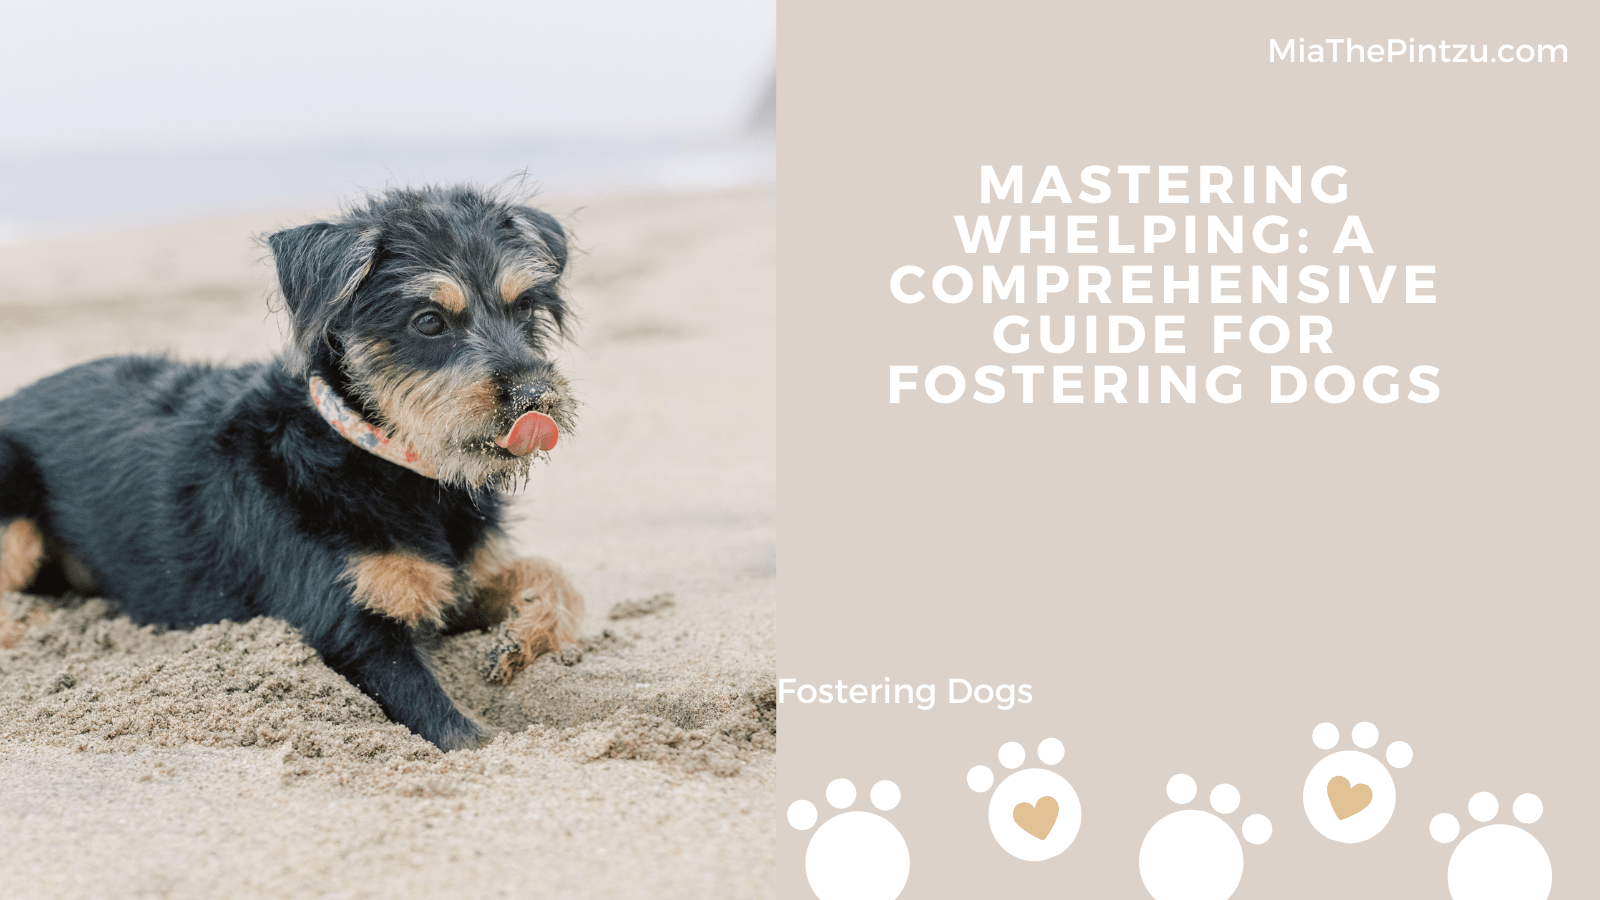 Mastering Whelping: A Comprehensive Guide for Fostering Dogs